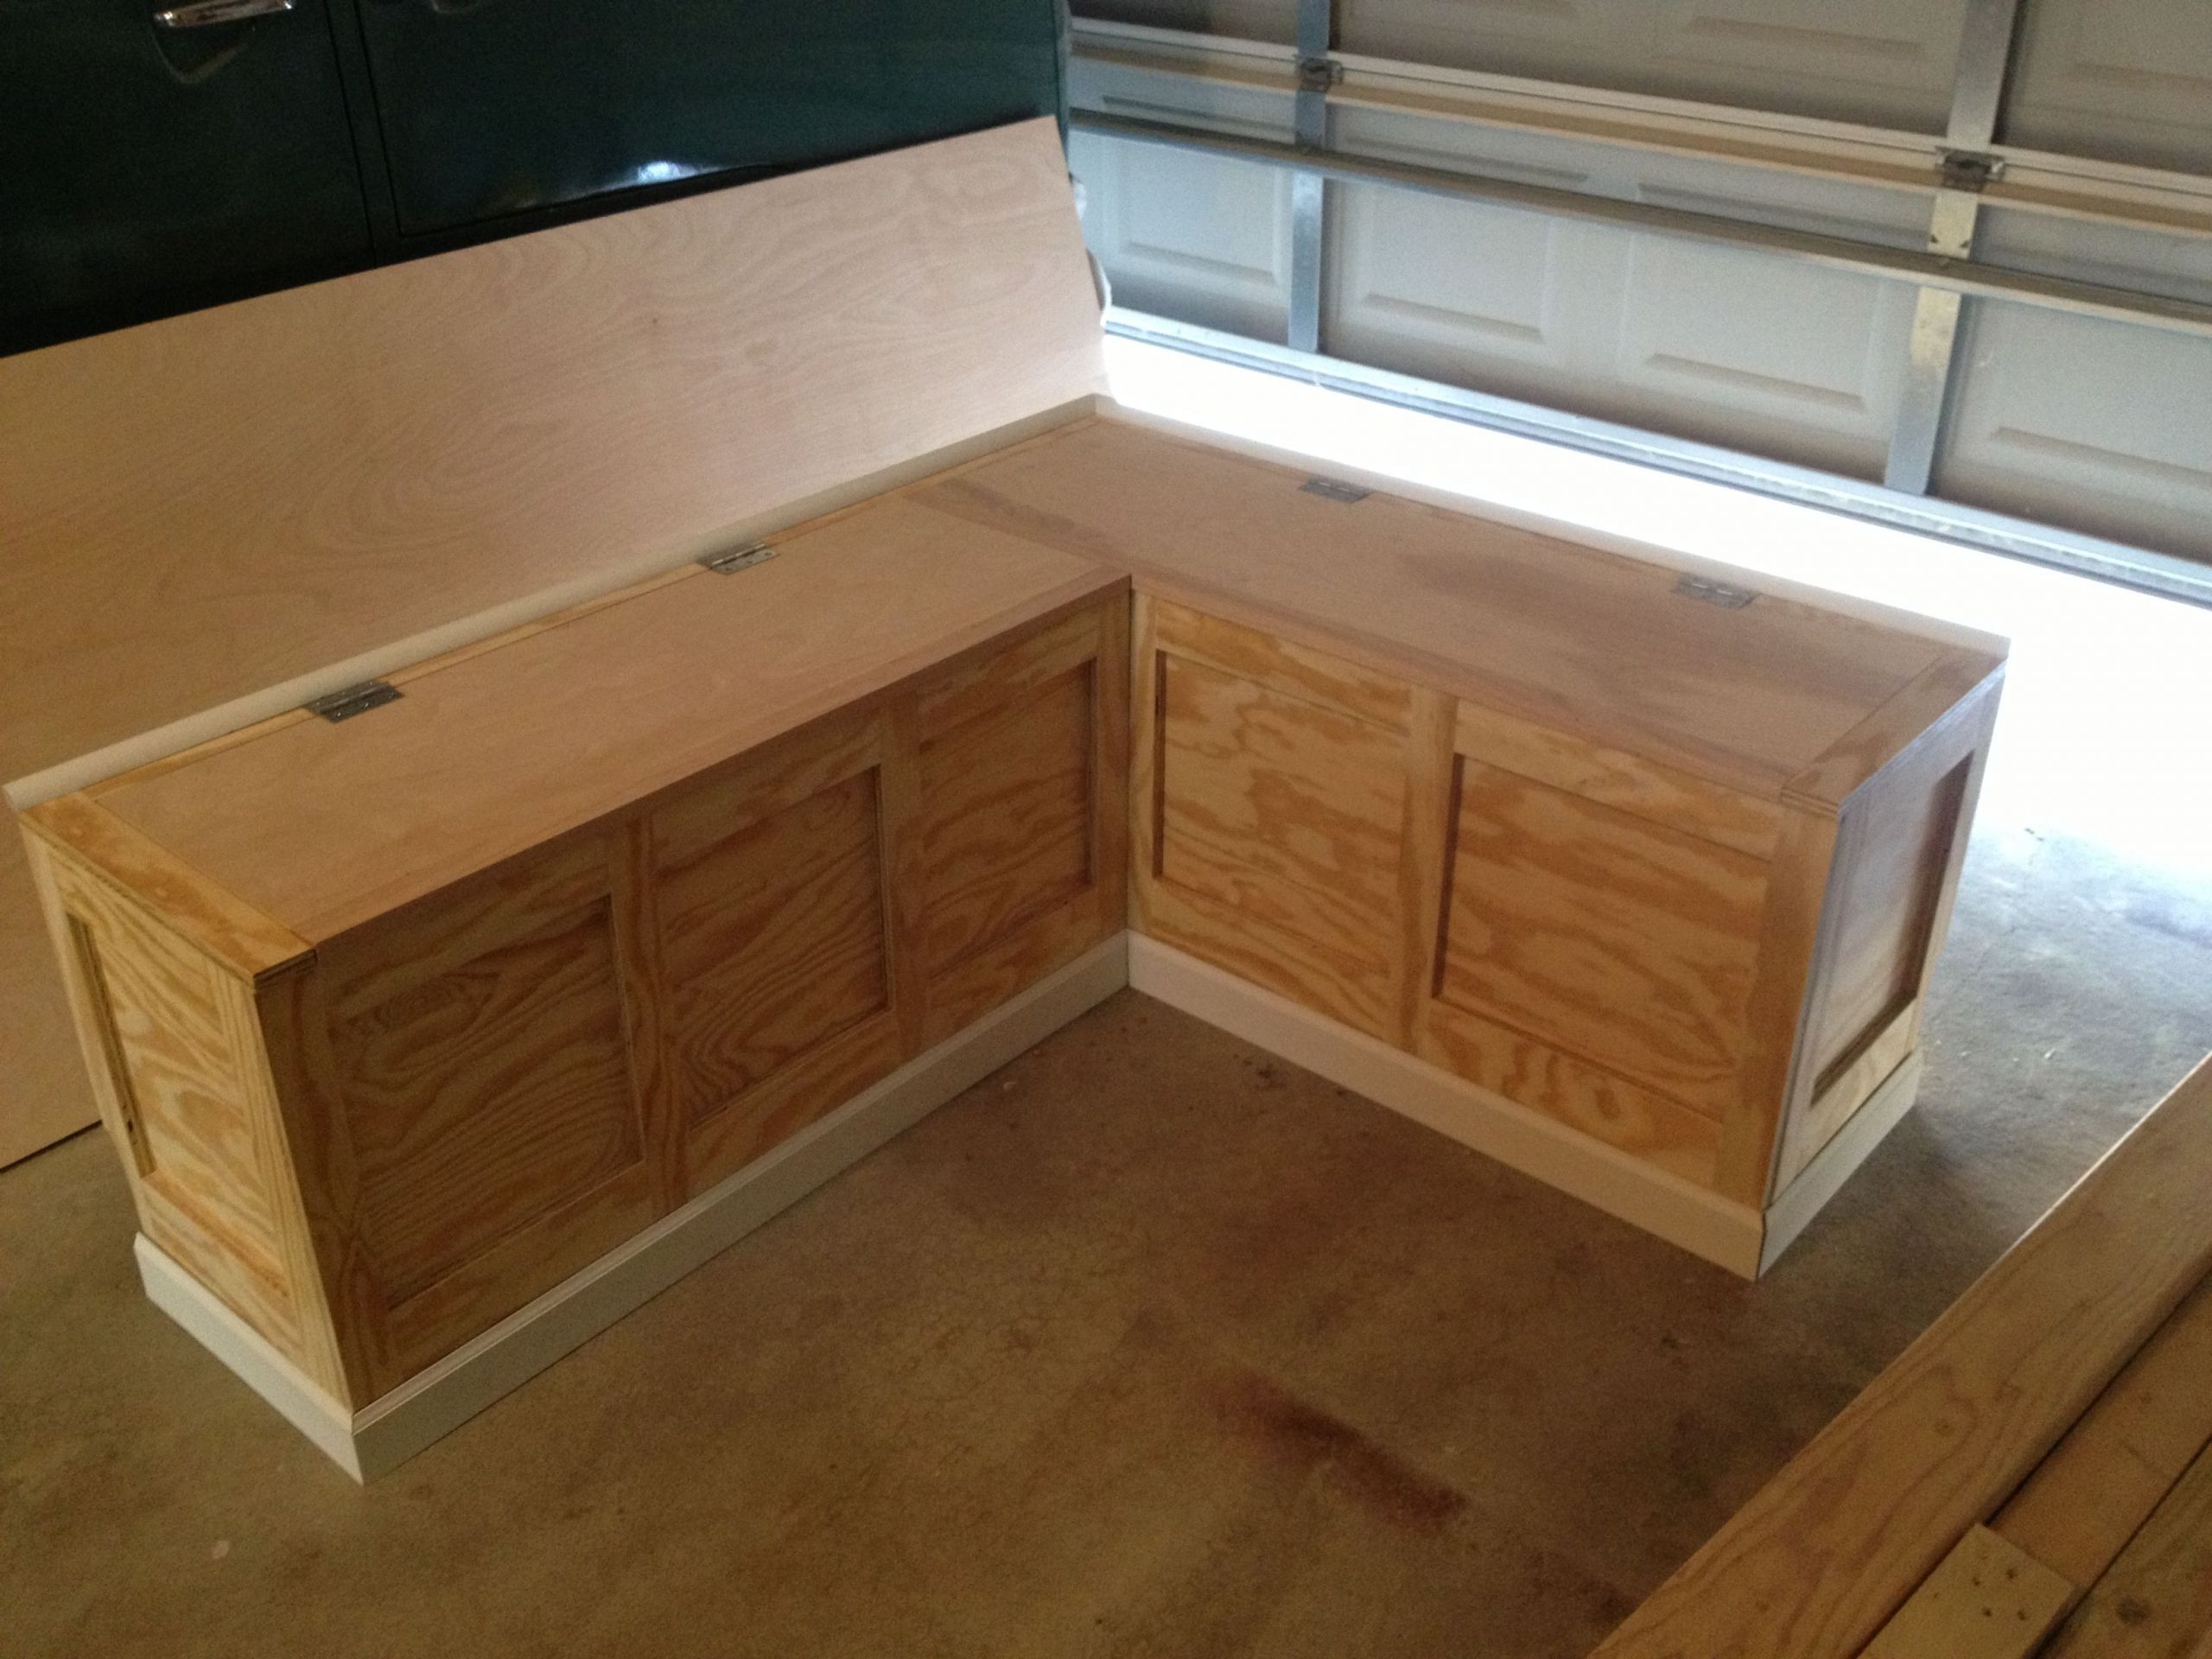 Kitchen Nook With Storage Bench
 Finished Corner bench… ly thing left is the install and